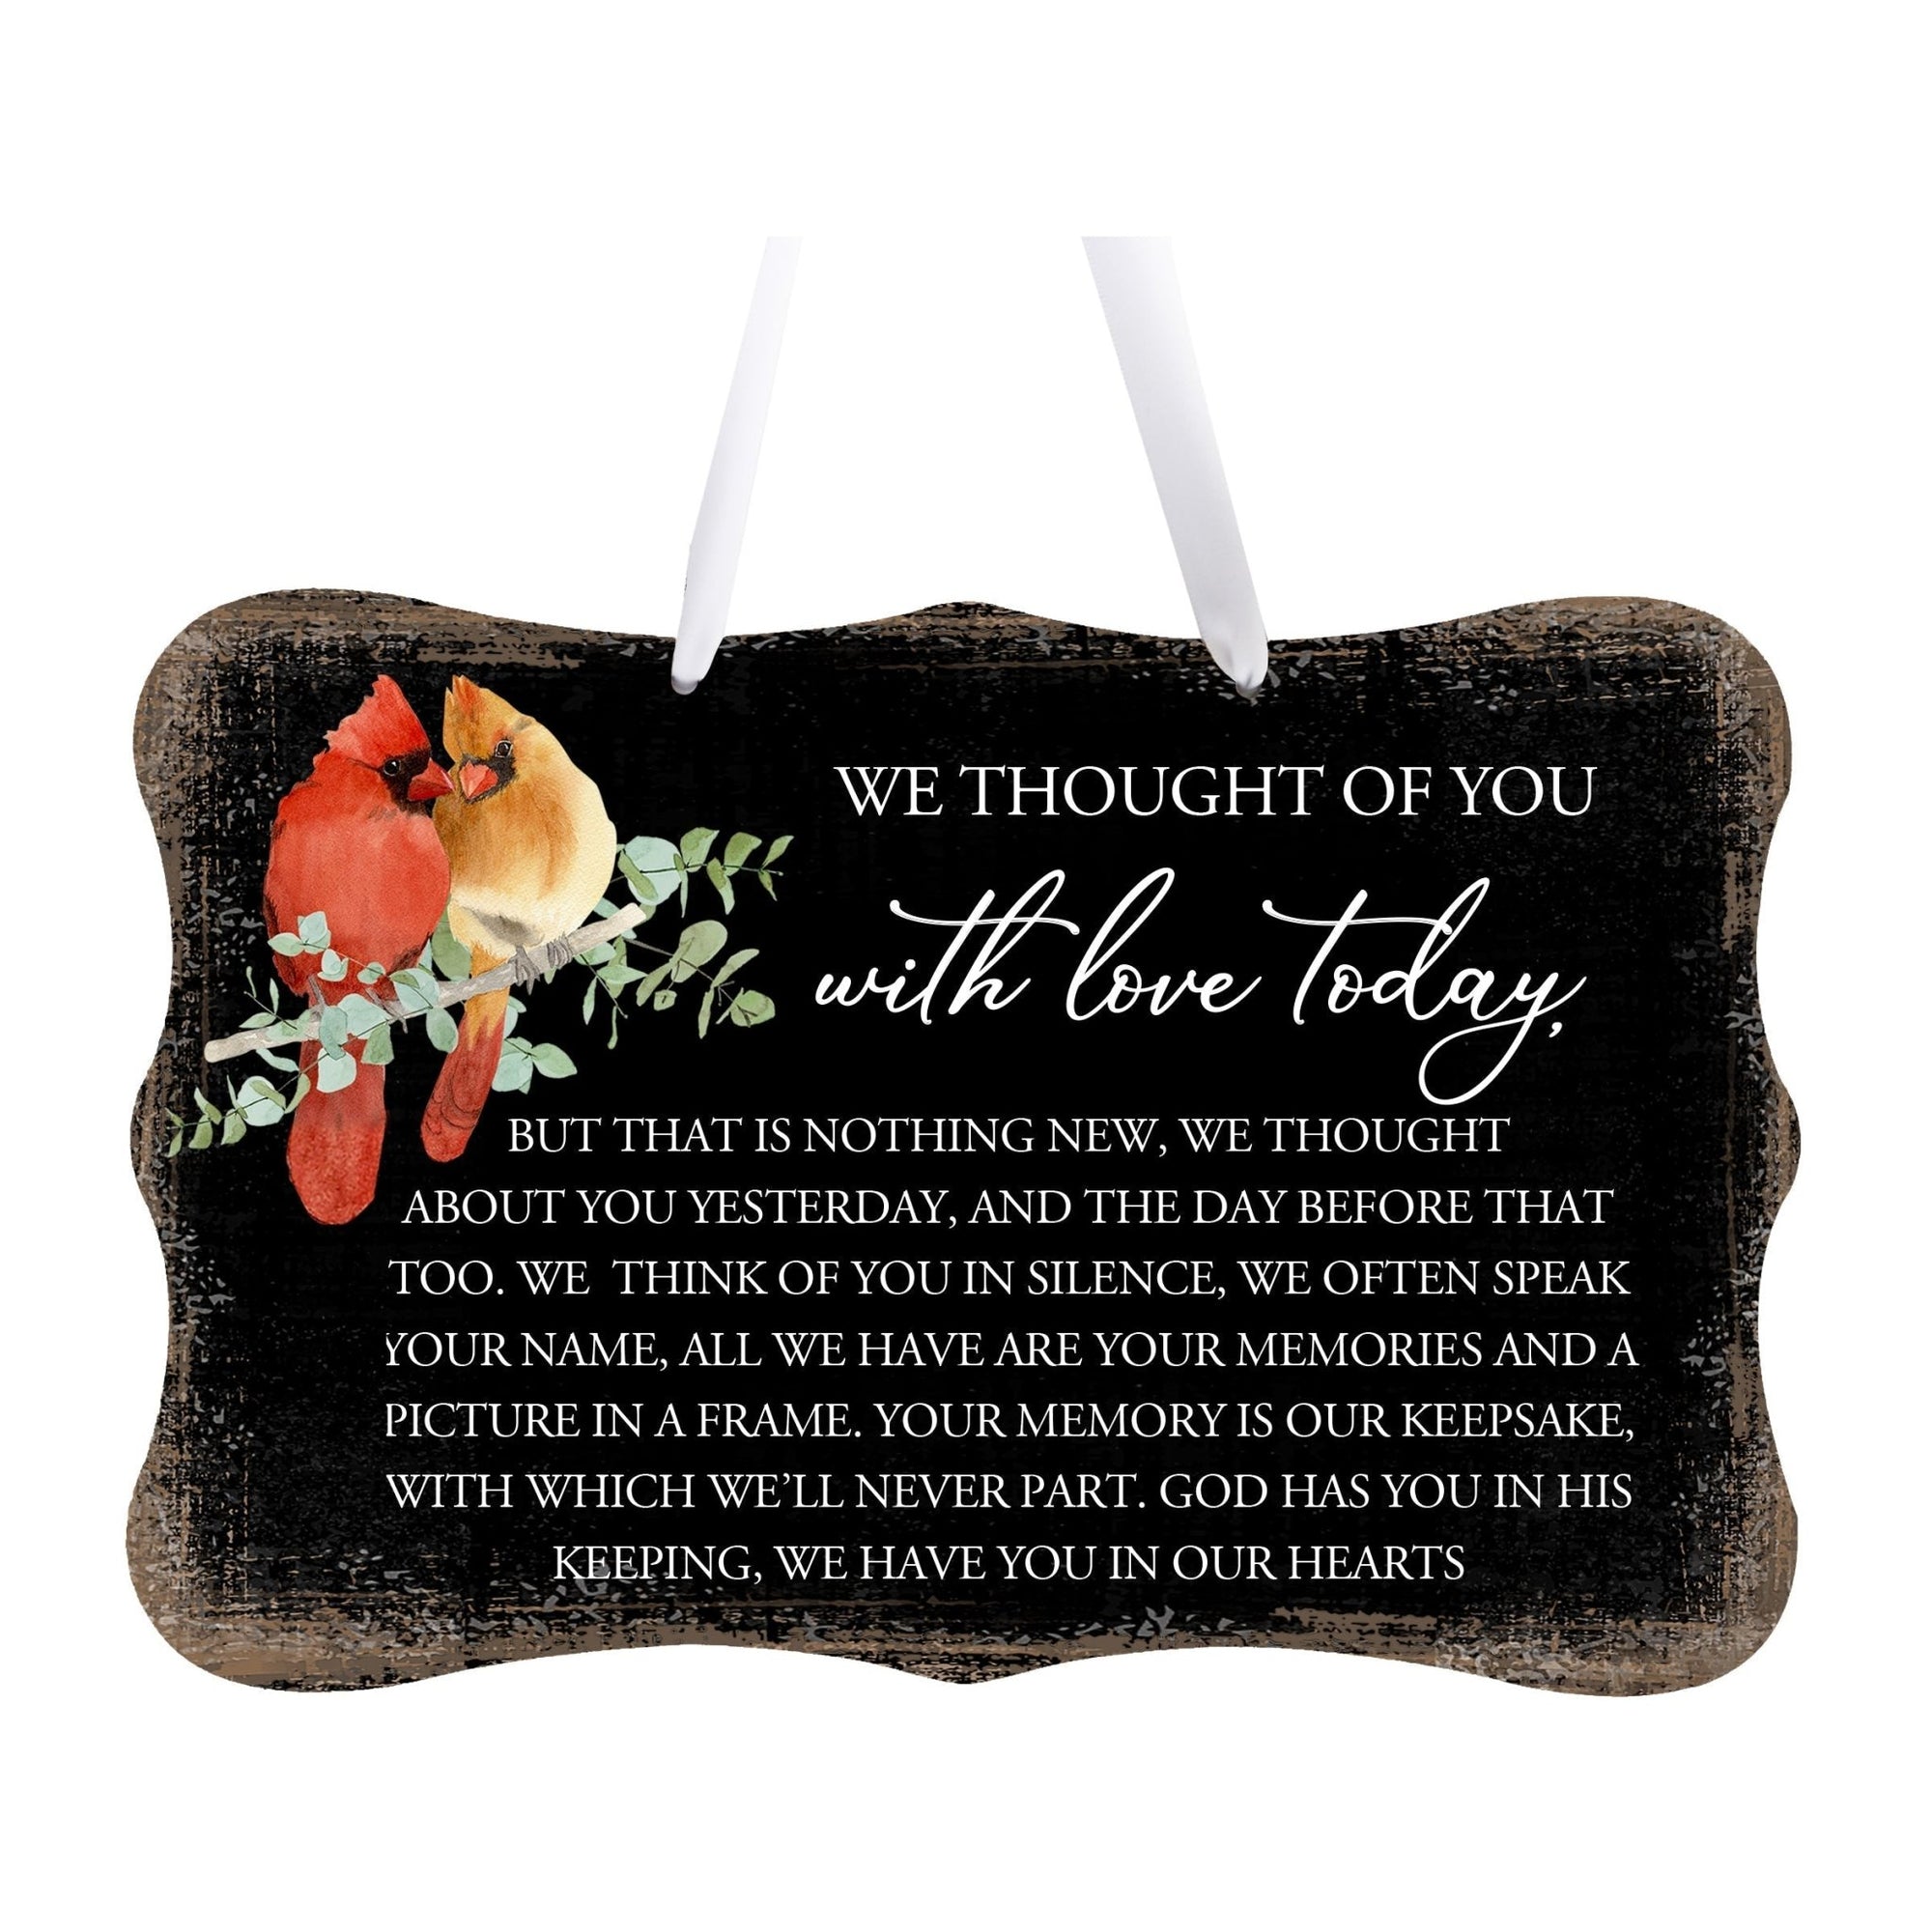 Funeral ribbon sign with a heartfelt message – a meaningful memorial tribute.